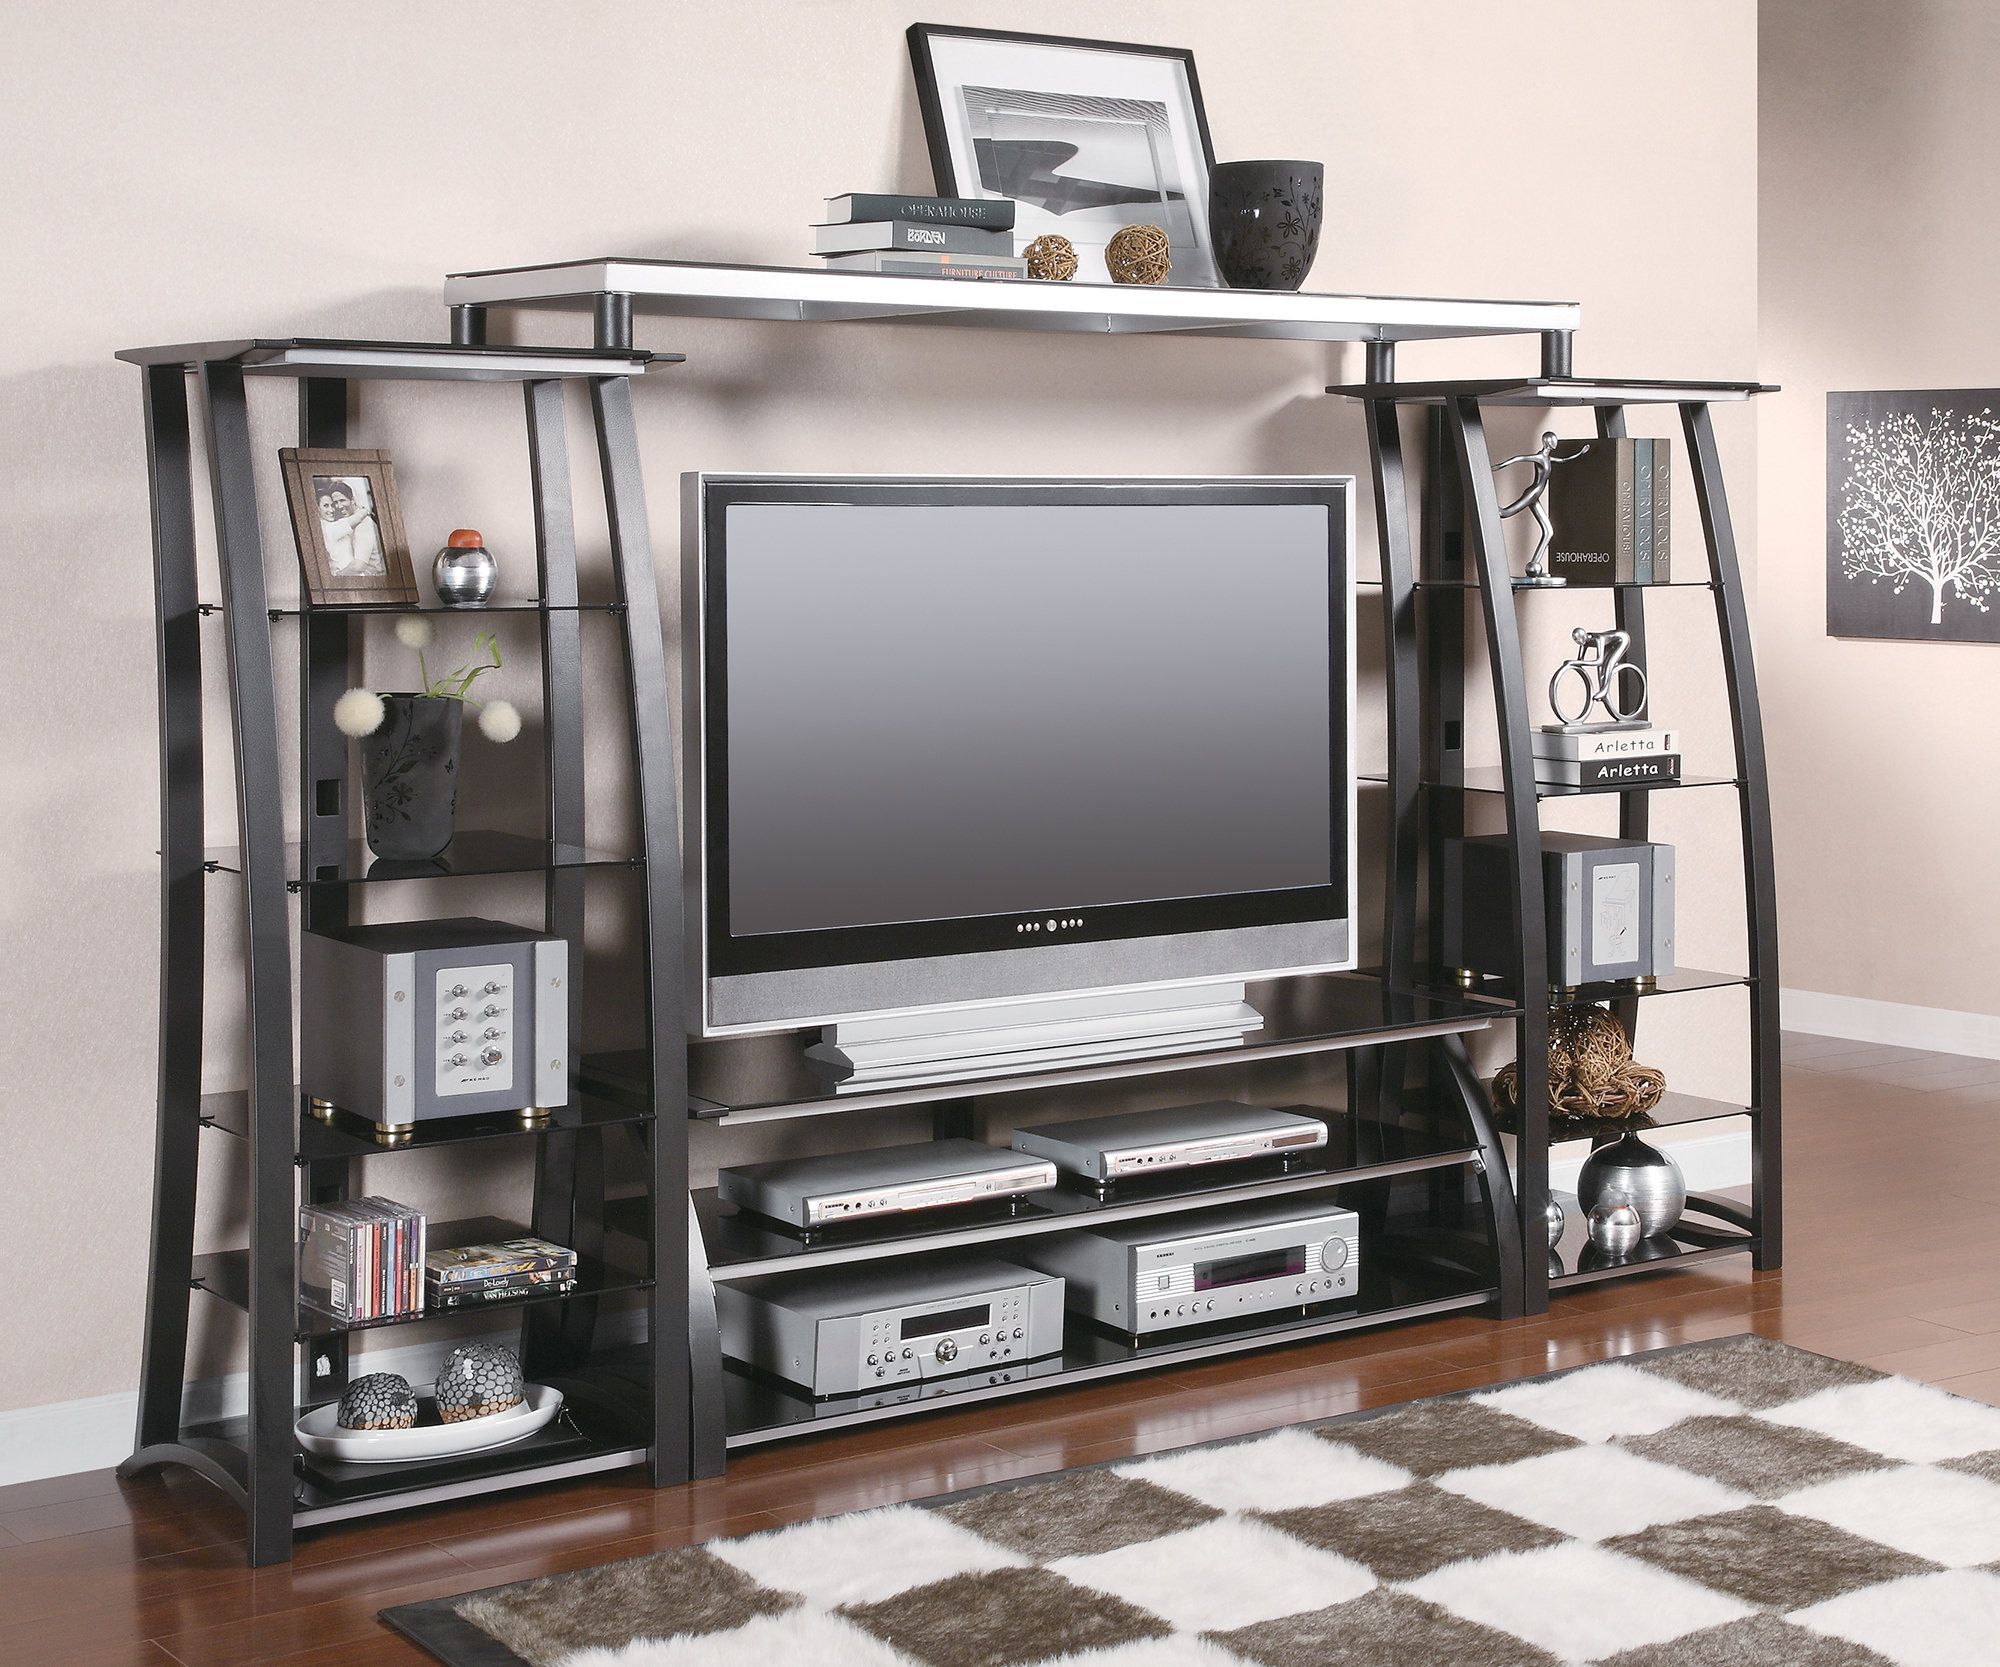 Tv Stands With Hutch You'll Love | Wayfair Intended For Kilian Grey 49 Inch Tv Stands (View 5 of 30)